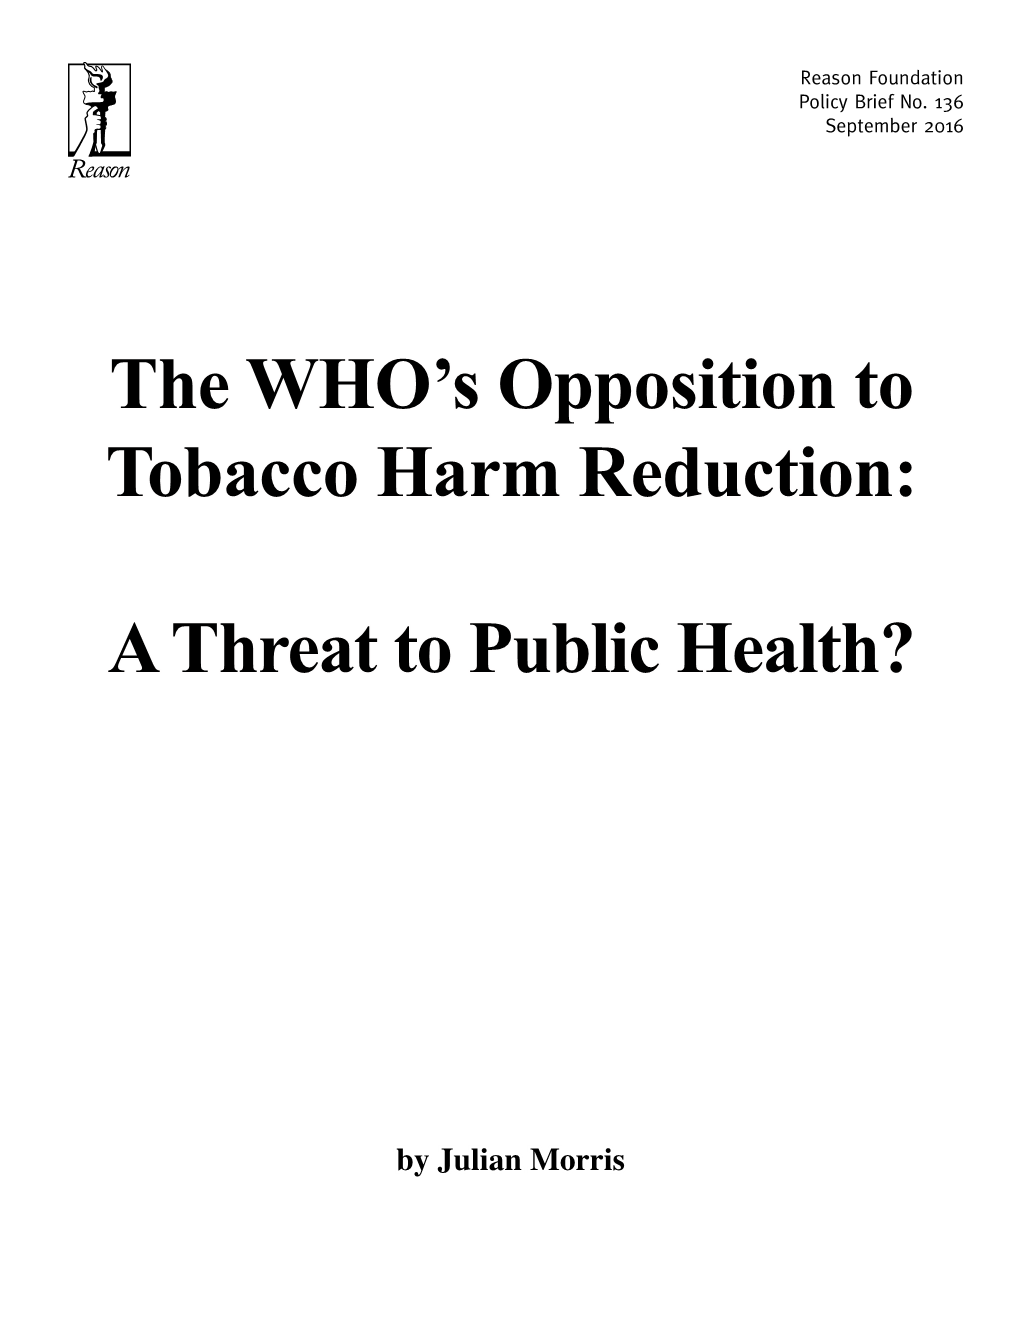 The World Health Organization's Opposition to Tobacco Harm